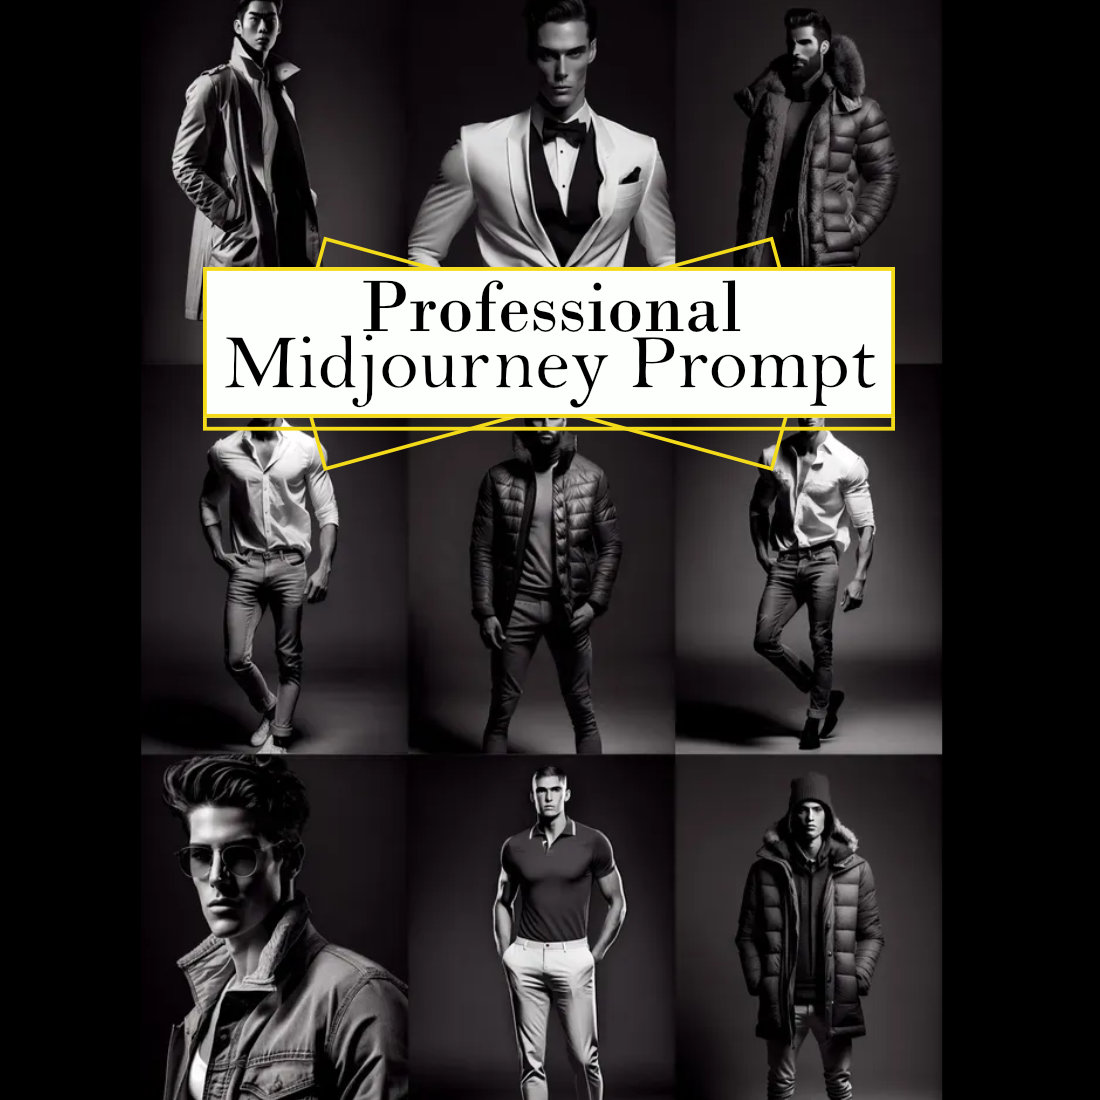 Male Fashion Photography Midjourney Prompt cover image.